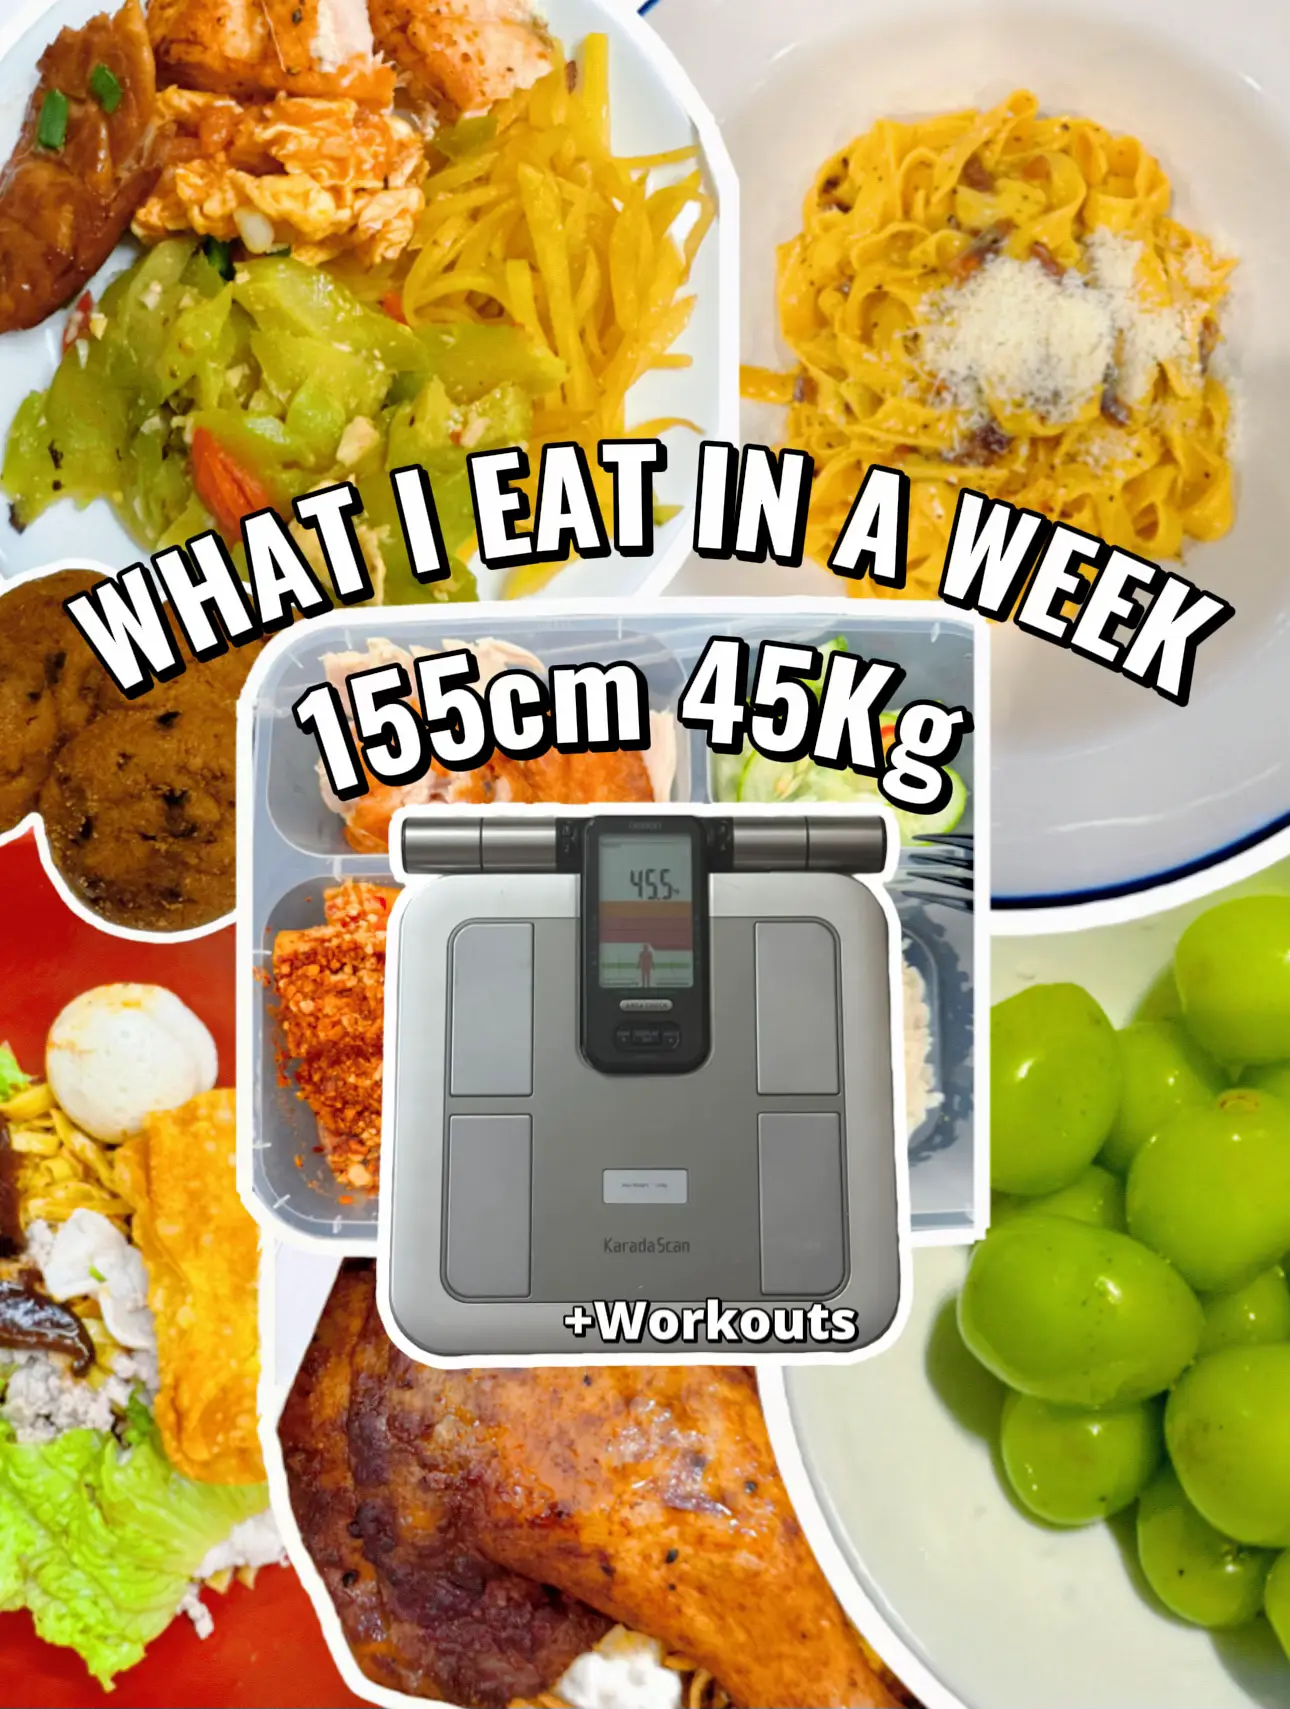 What I eat in a week | Balance Diet's images(0)